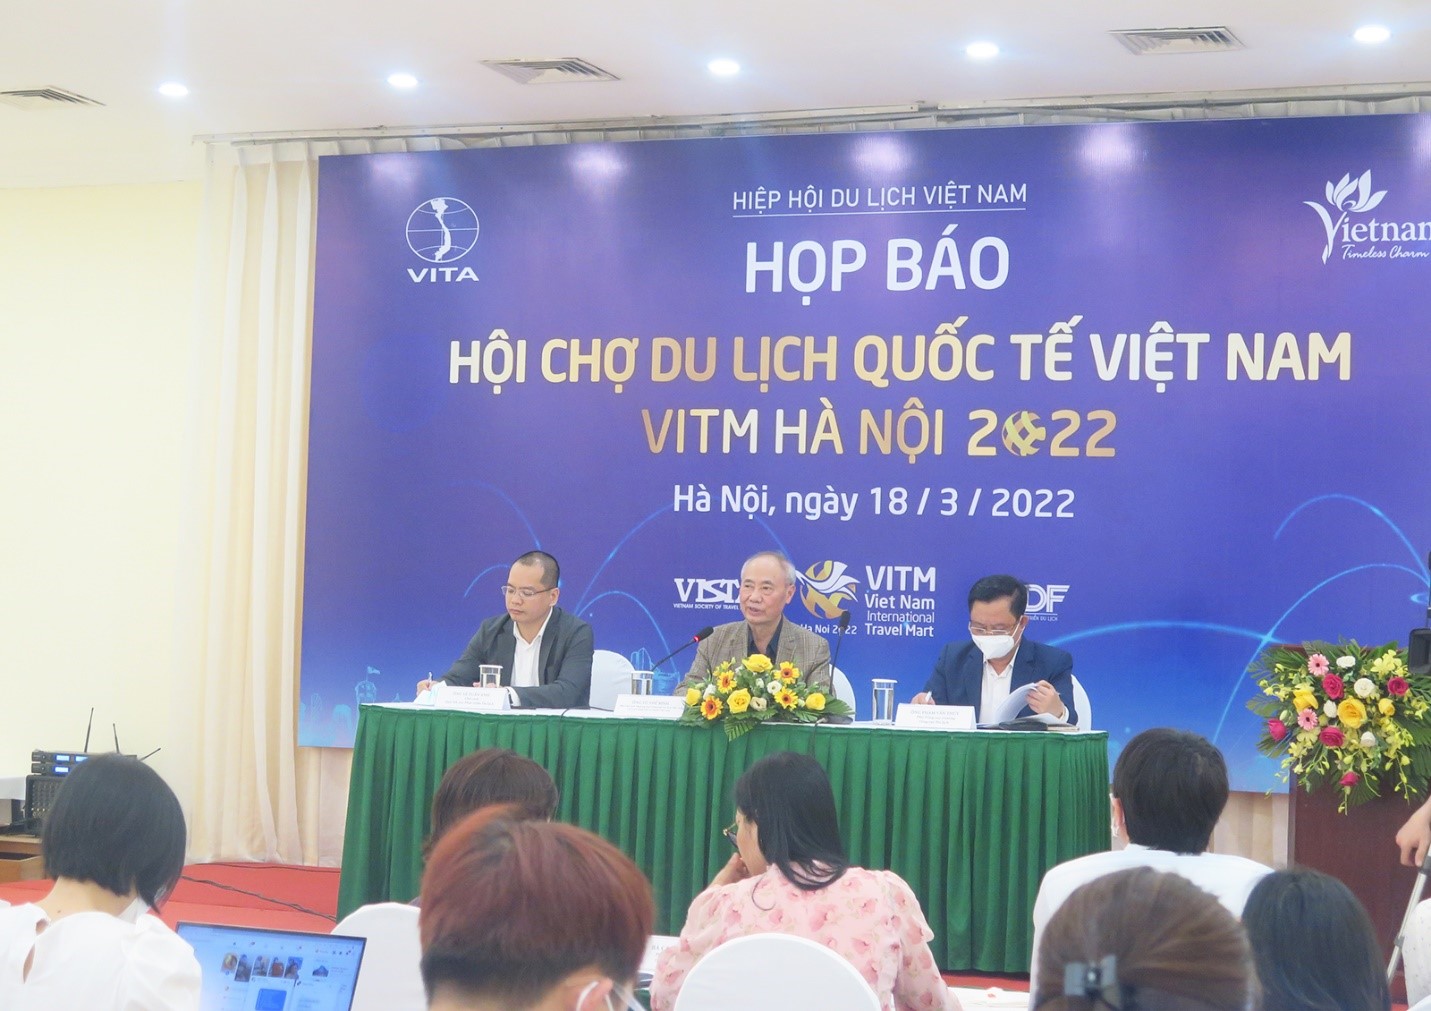 Vietnam International Travel Mart 2022 takes place from 31st Mar - 3rd Apr in Ha Noi